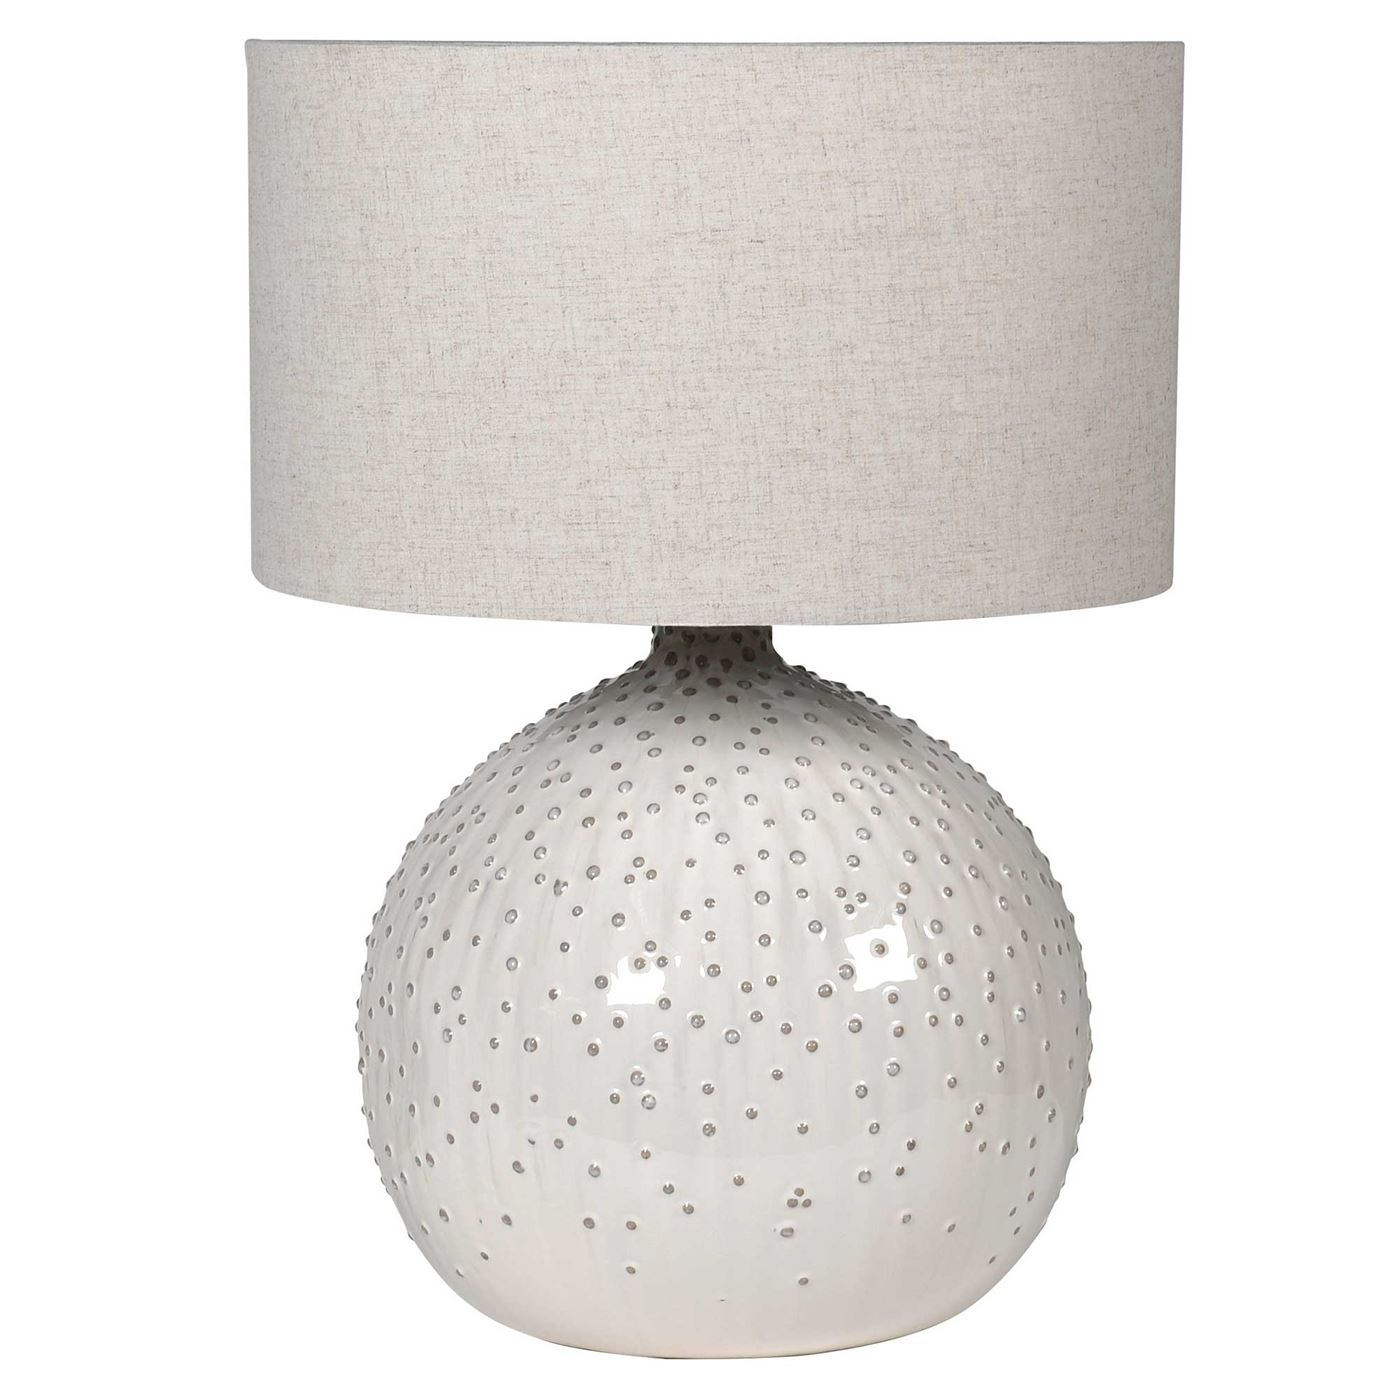 Cream Ceramic Dotted table Lamp | Barker & Stonehouse